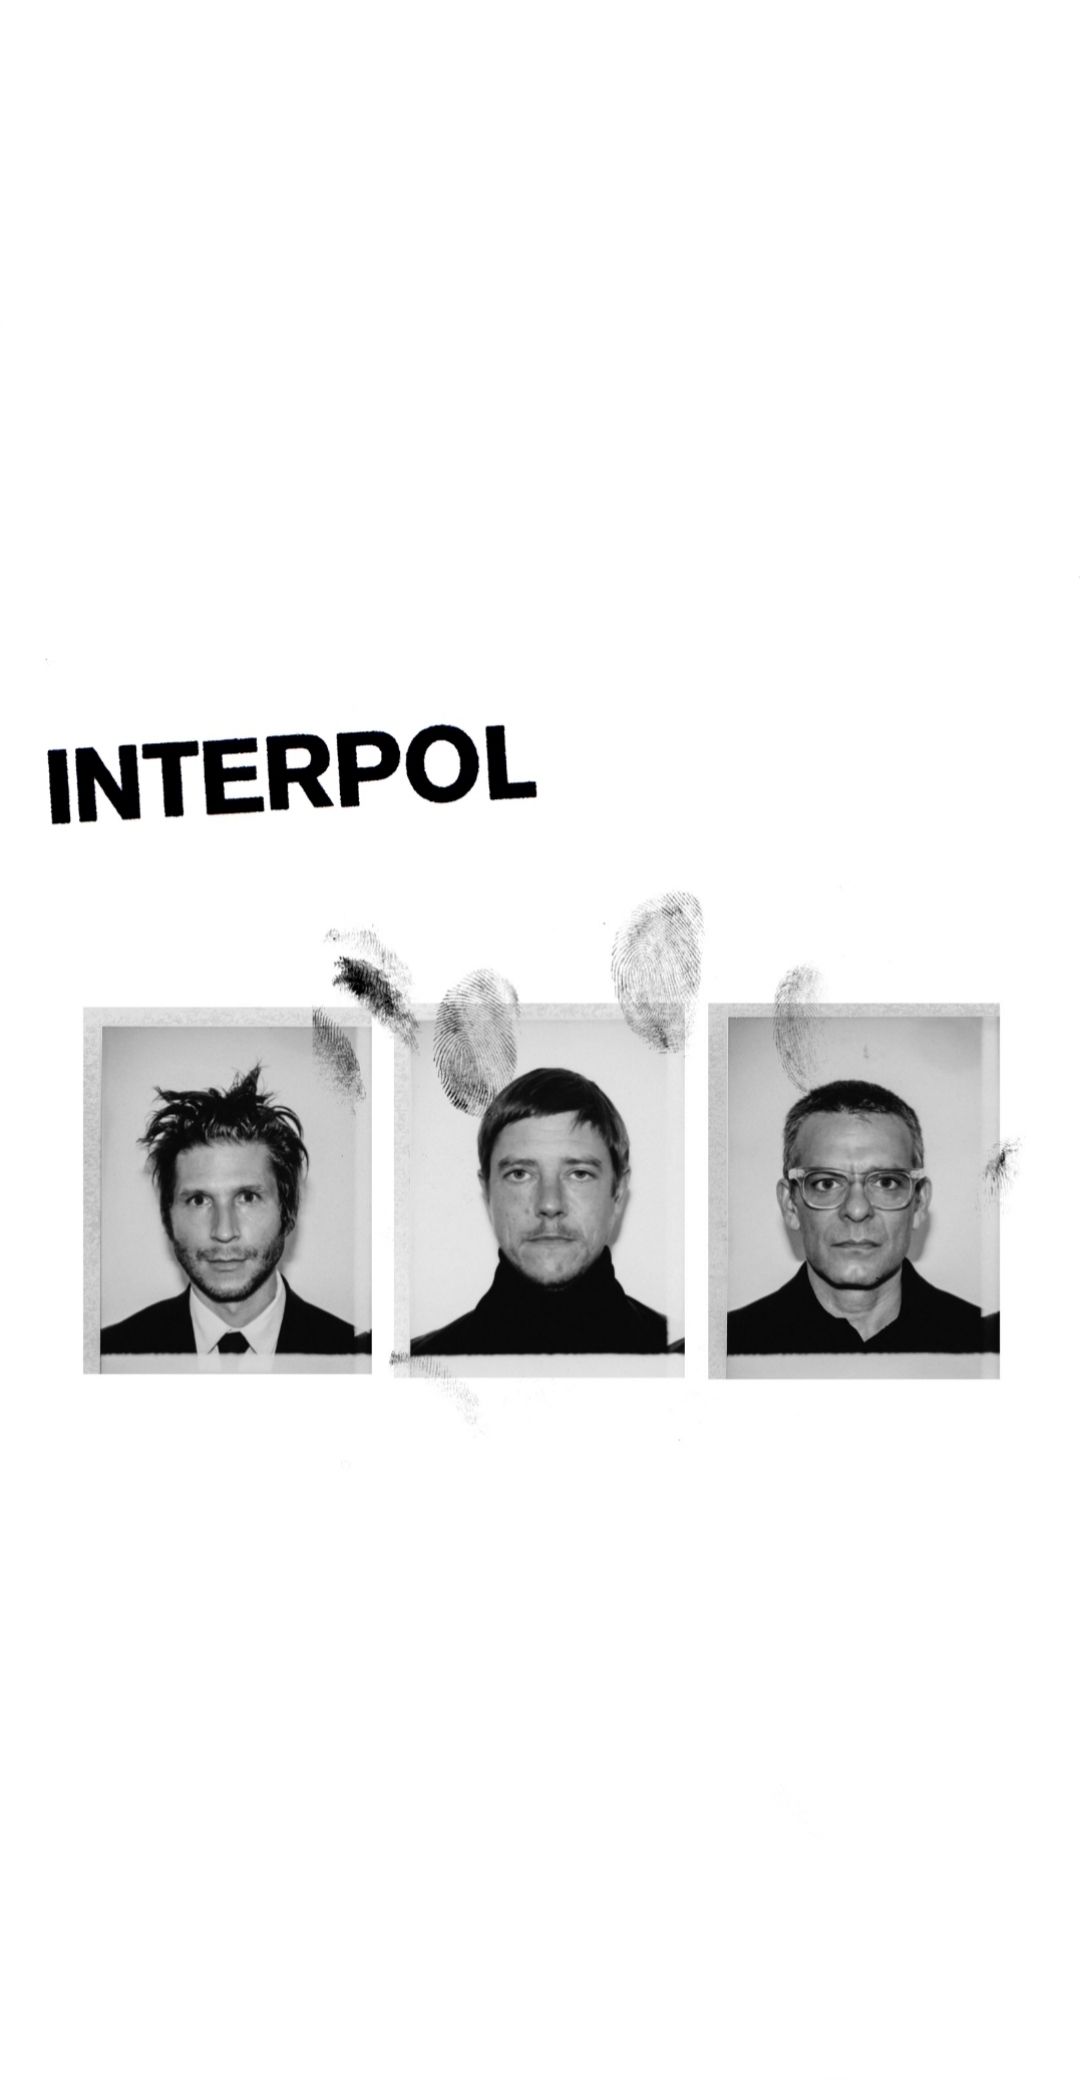 To Celebrate the Announcement of Fine Mess EP, I Created a [SG 9] Phone Wallpaper: Interpol